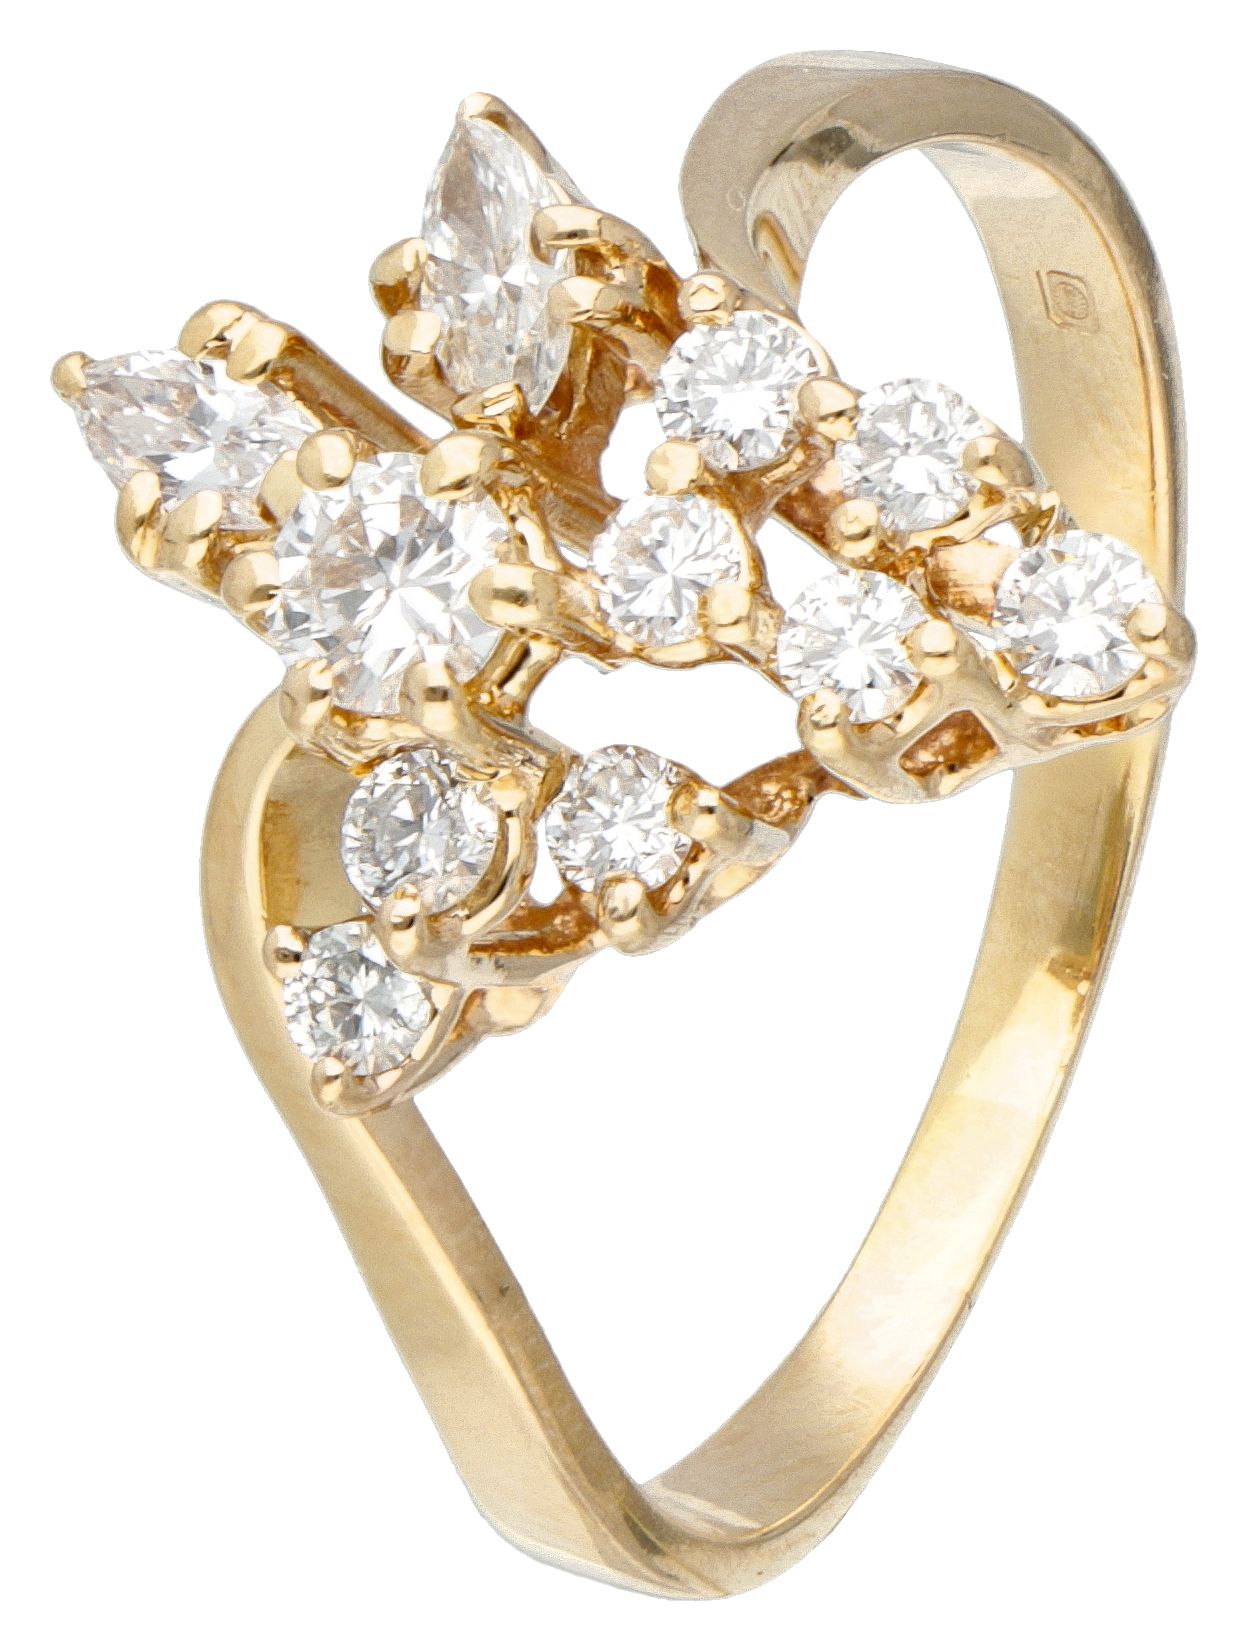 14K. Yellow gold ring set with approx. 0.55 ct. Diamond. Hallmarks: 585. Set wit&hellip;